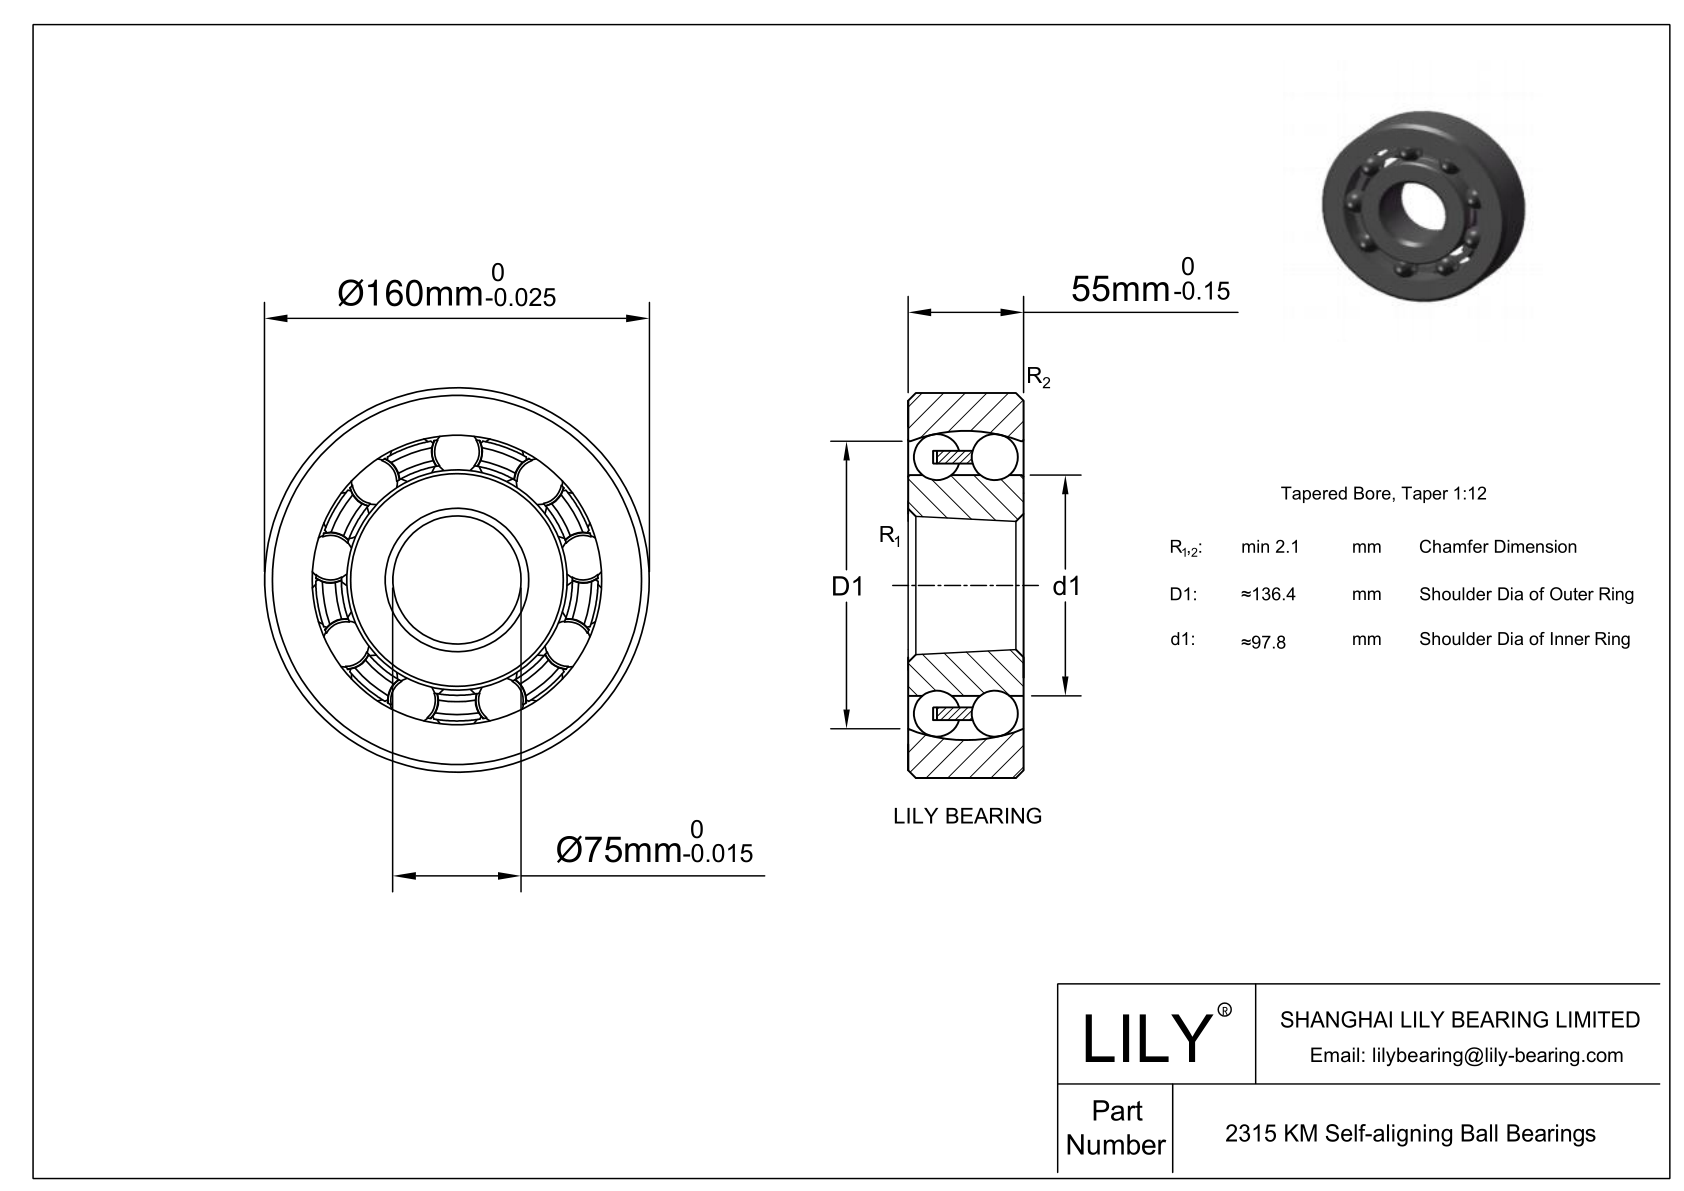 S2315 KM Stainless Steel Self Aligning Ball Bearings cad drawing